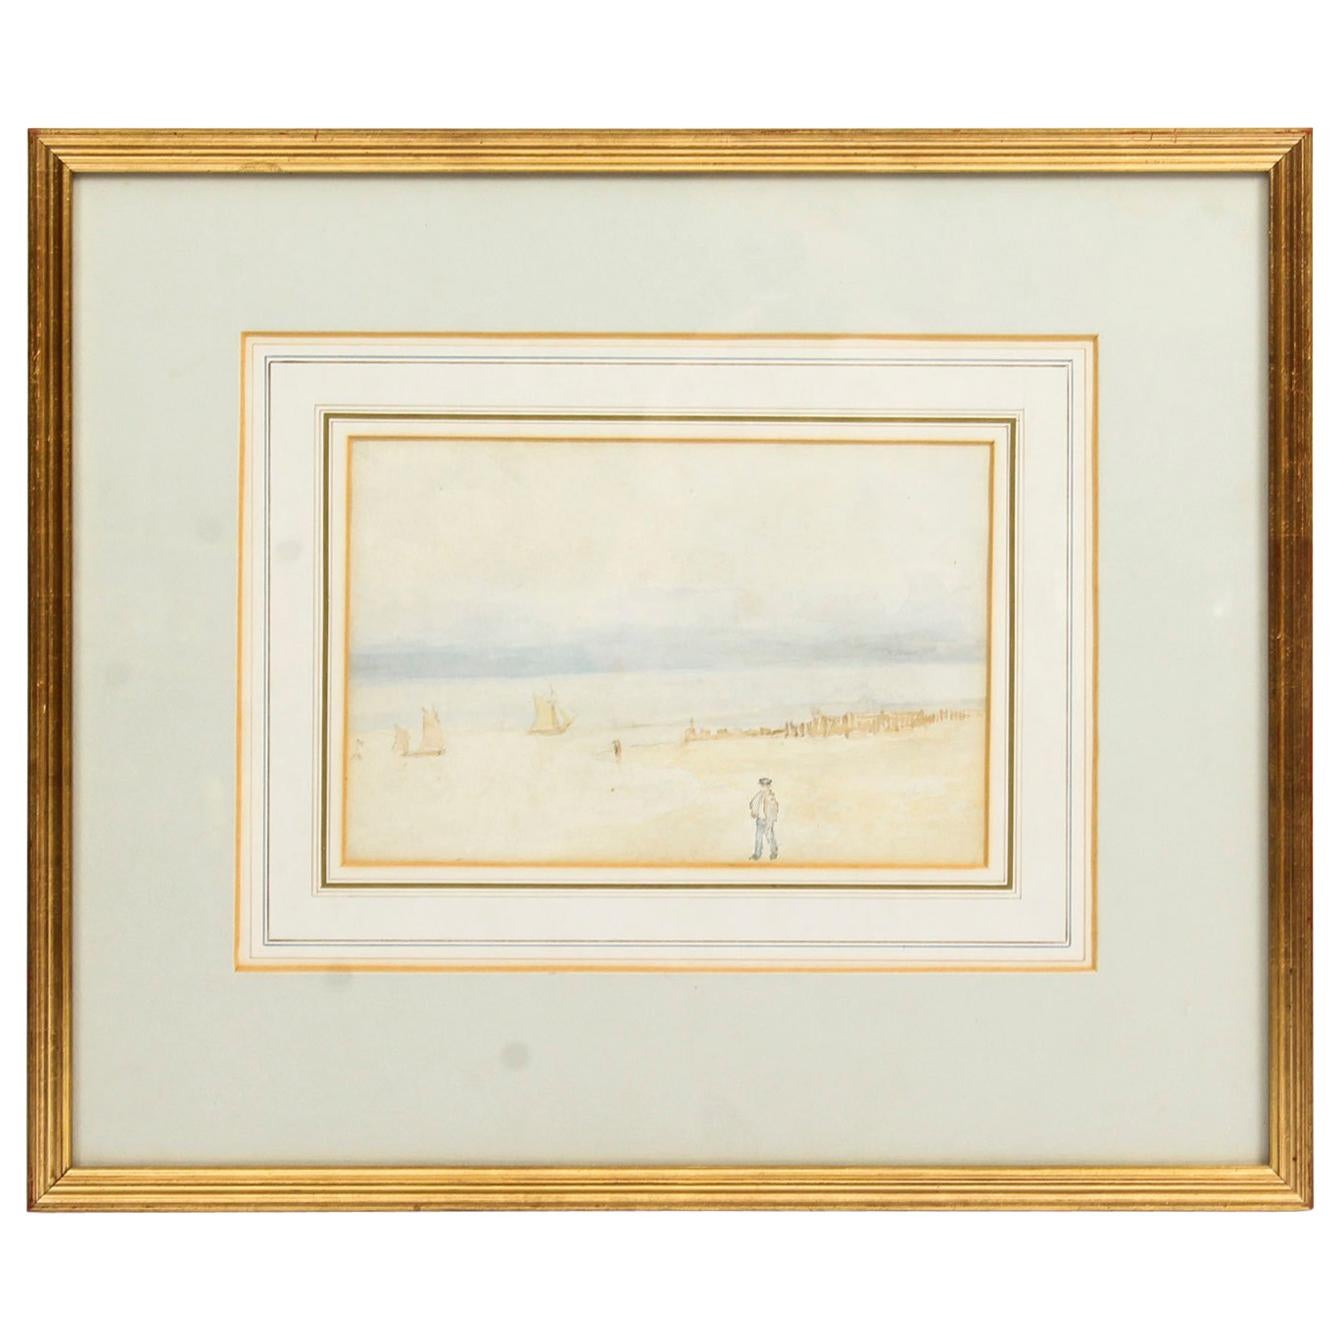 Antique Watercolor by R. E. Walker, 19th Century in Date